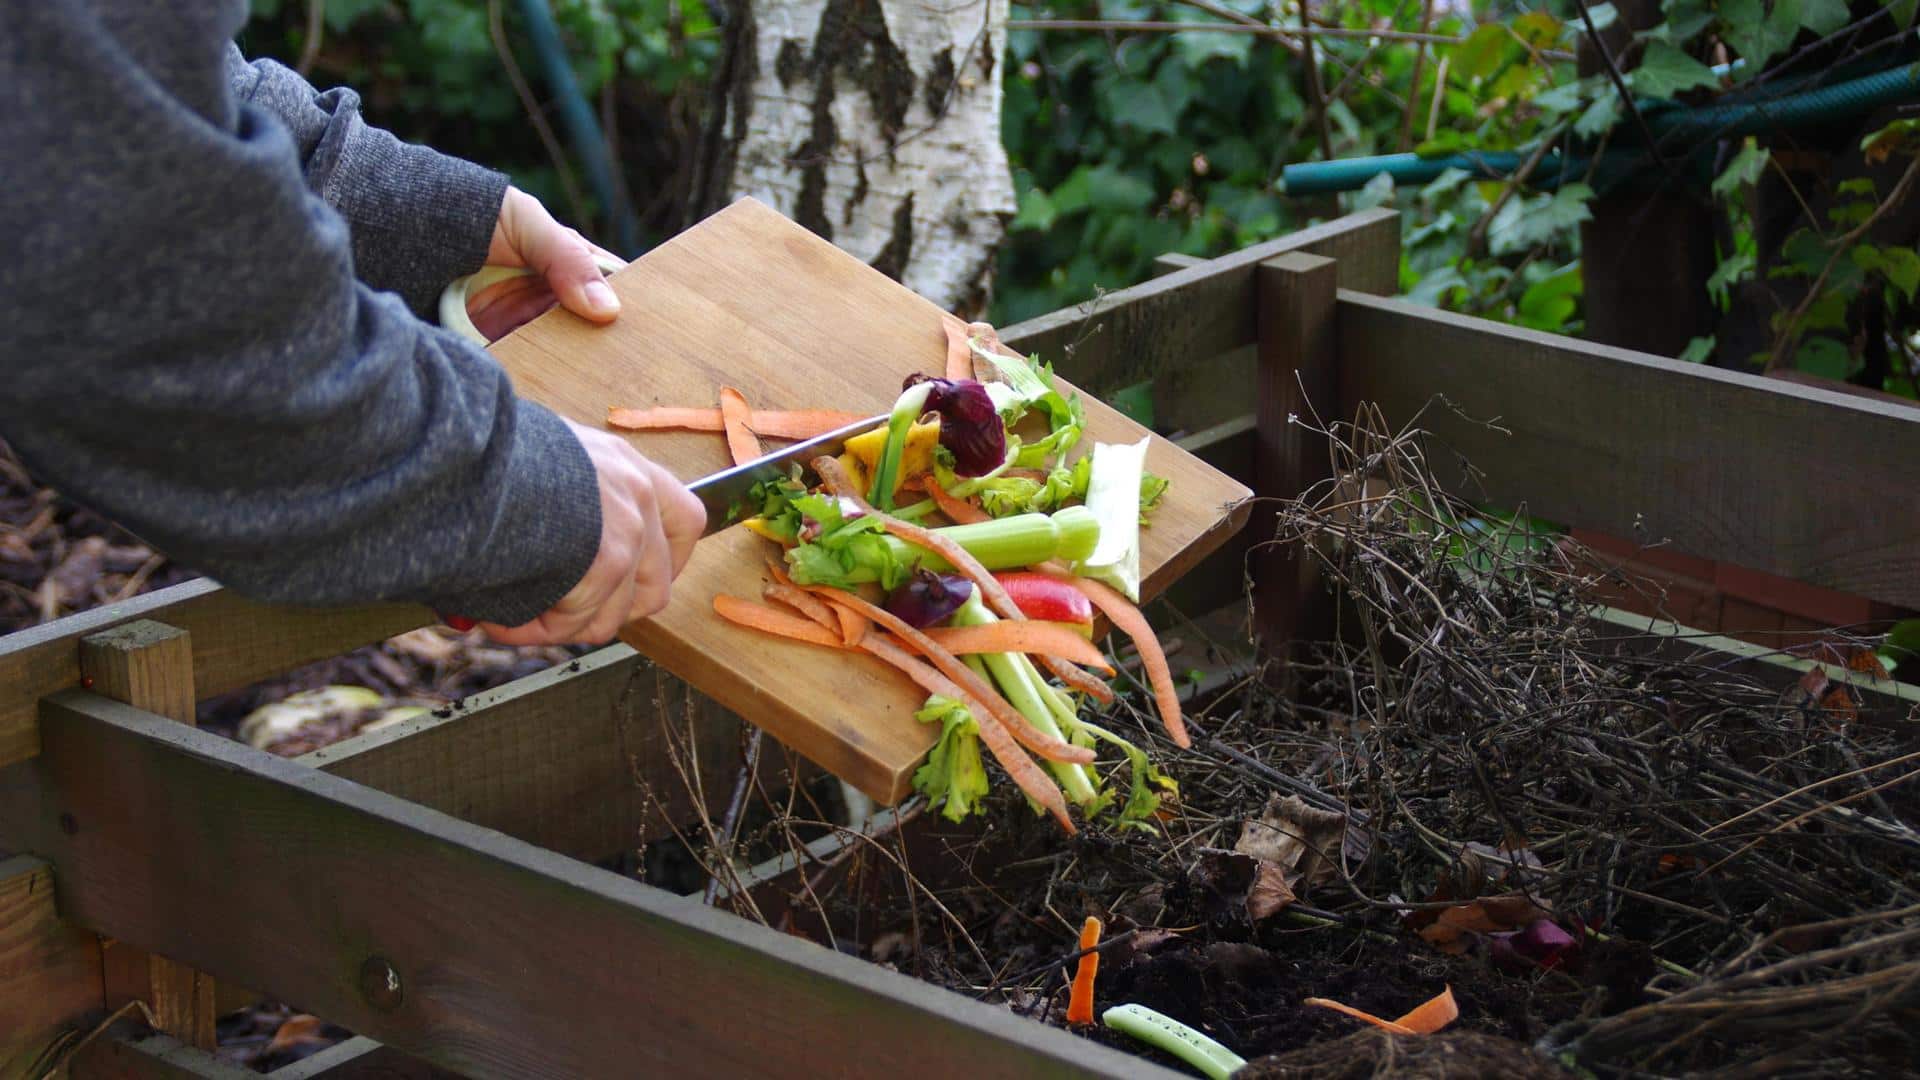 Here's how you can repurpose your food scraps